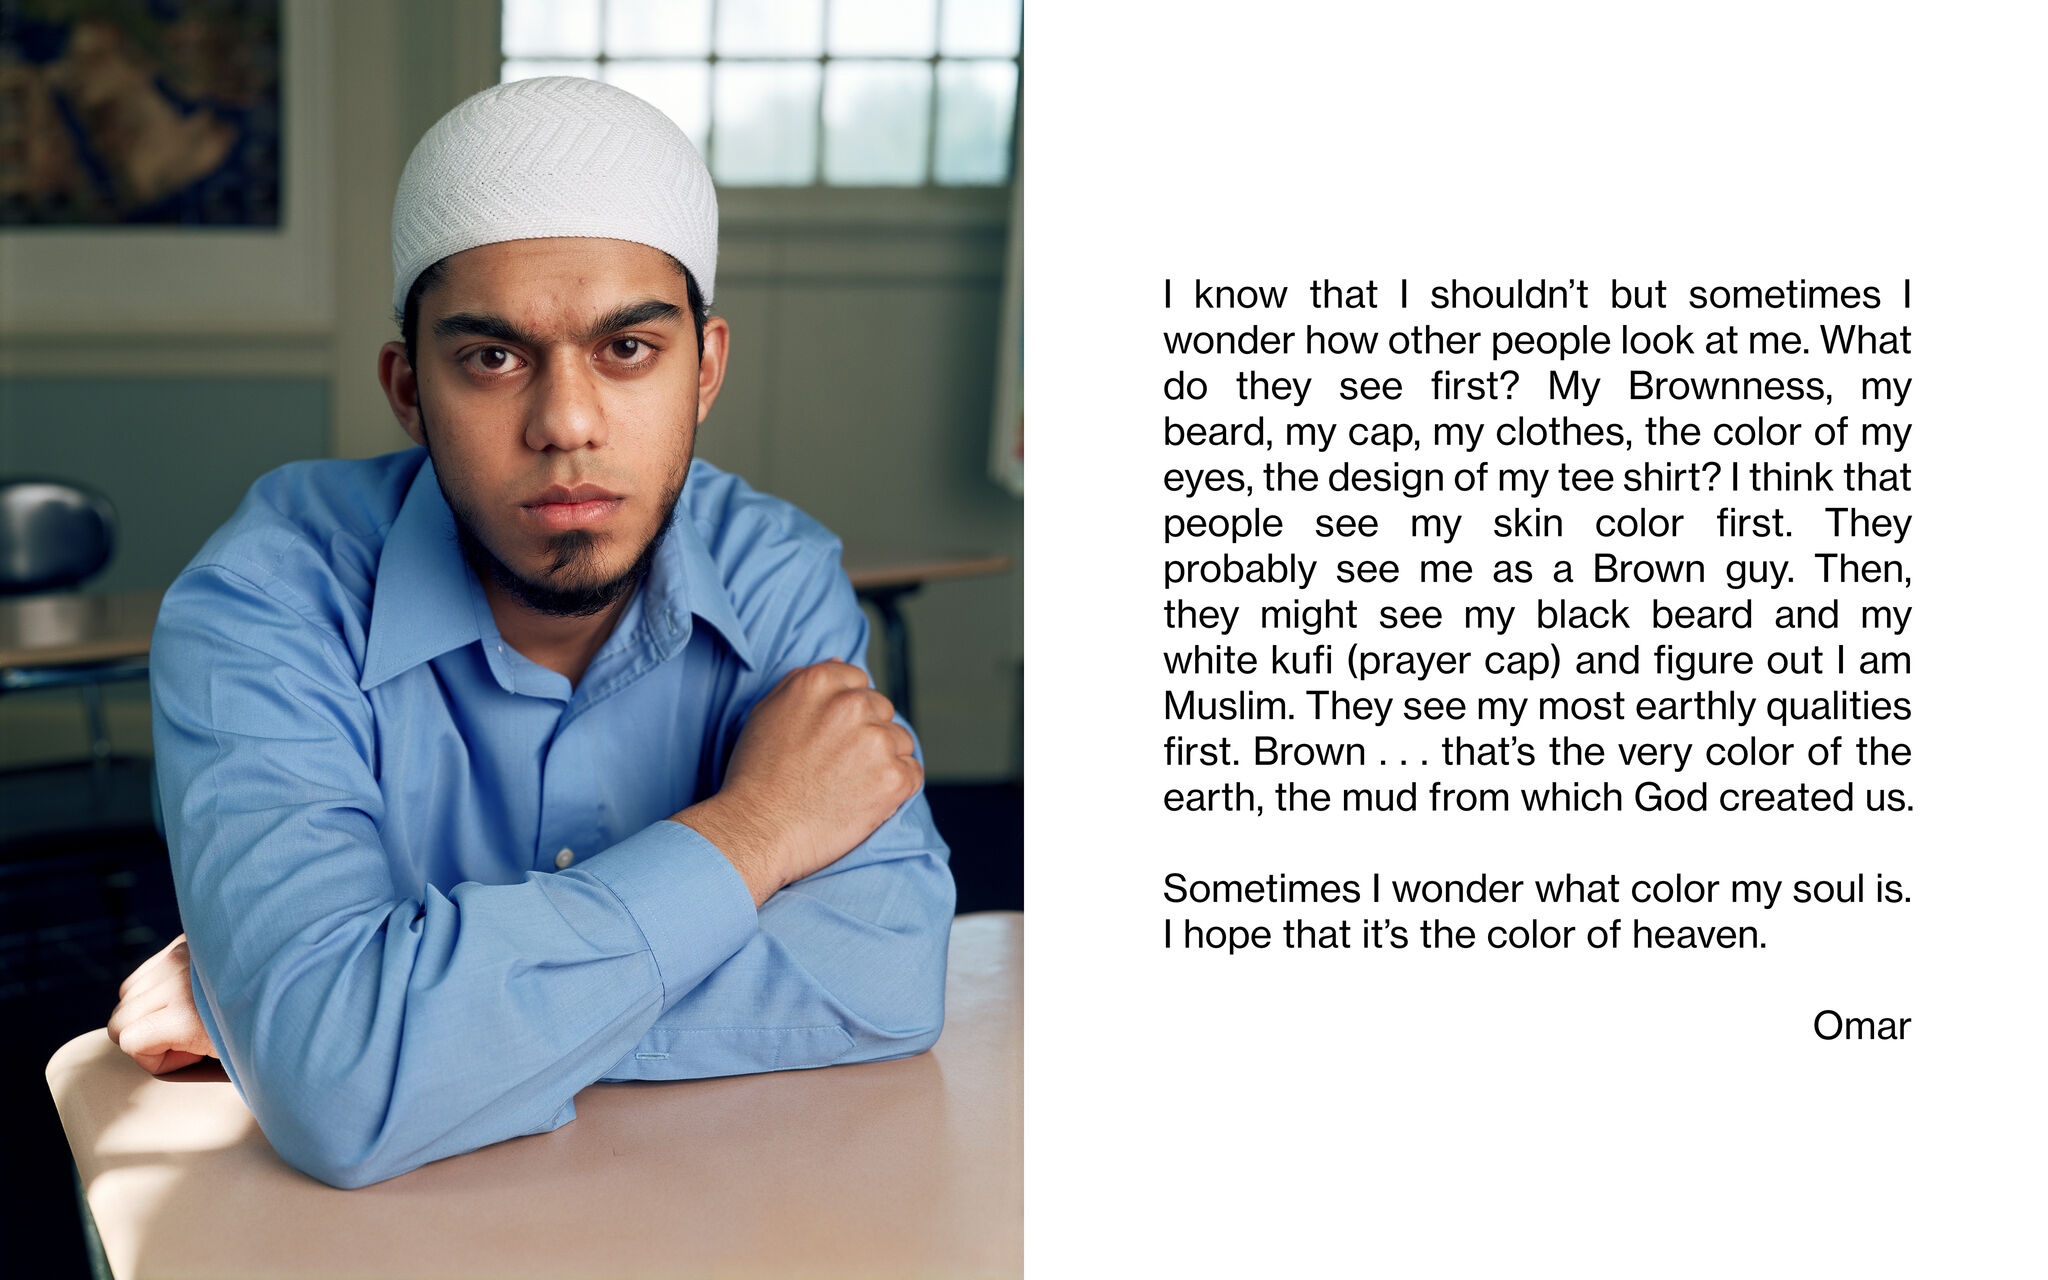 A portrait of a student resting their arms on a school desk and facing the camera. "I know that I shouldn't but sometimes I wonder how other people look at me. What do they see first? My Brownness, my beard, my cap, my clothes, the color of my eyes, the design of my tee shirt? I think that people see my skin color first. They probably see me as a Brown guy. Then, they might see my black beard and my white kufi (prayer cap) and figure out that I am Muslim. They see my most earthly qualities first. Brown . . . that's the very color of the earth, the mud from which God created us. Sometime I wonder what color my soul is. I hope that it's the color of heaven. Omar"